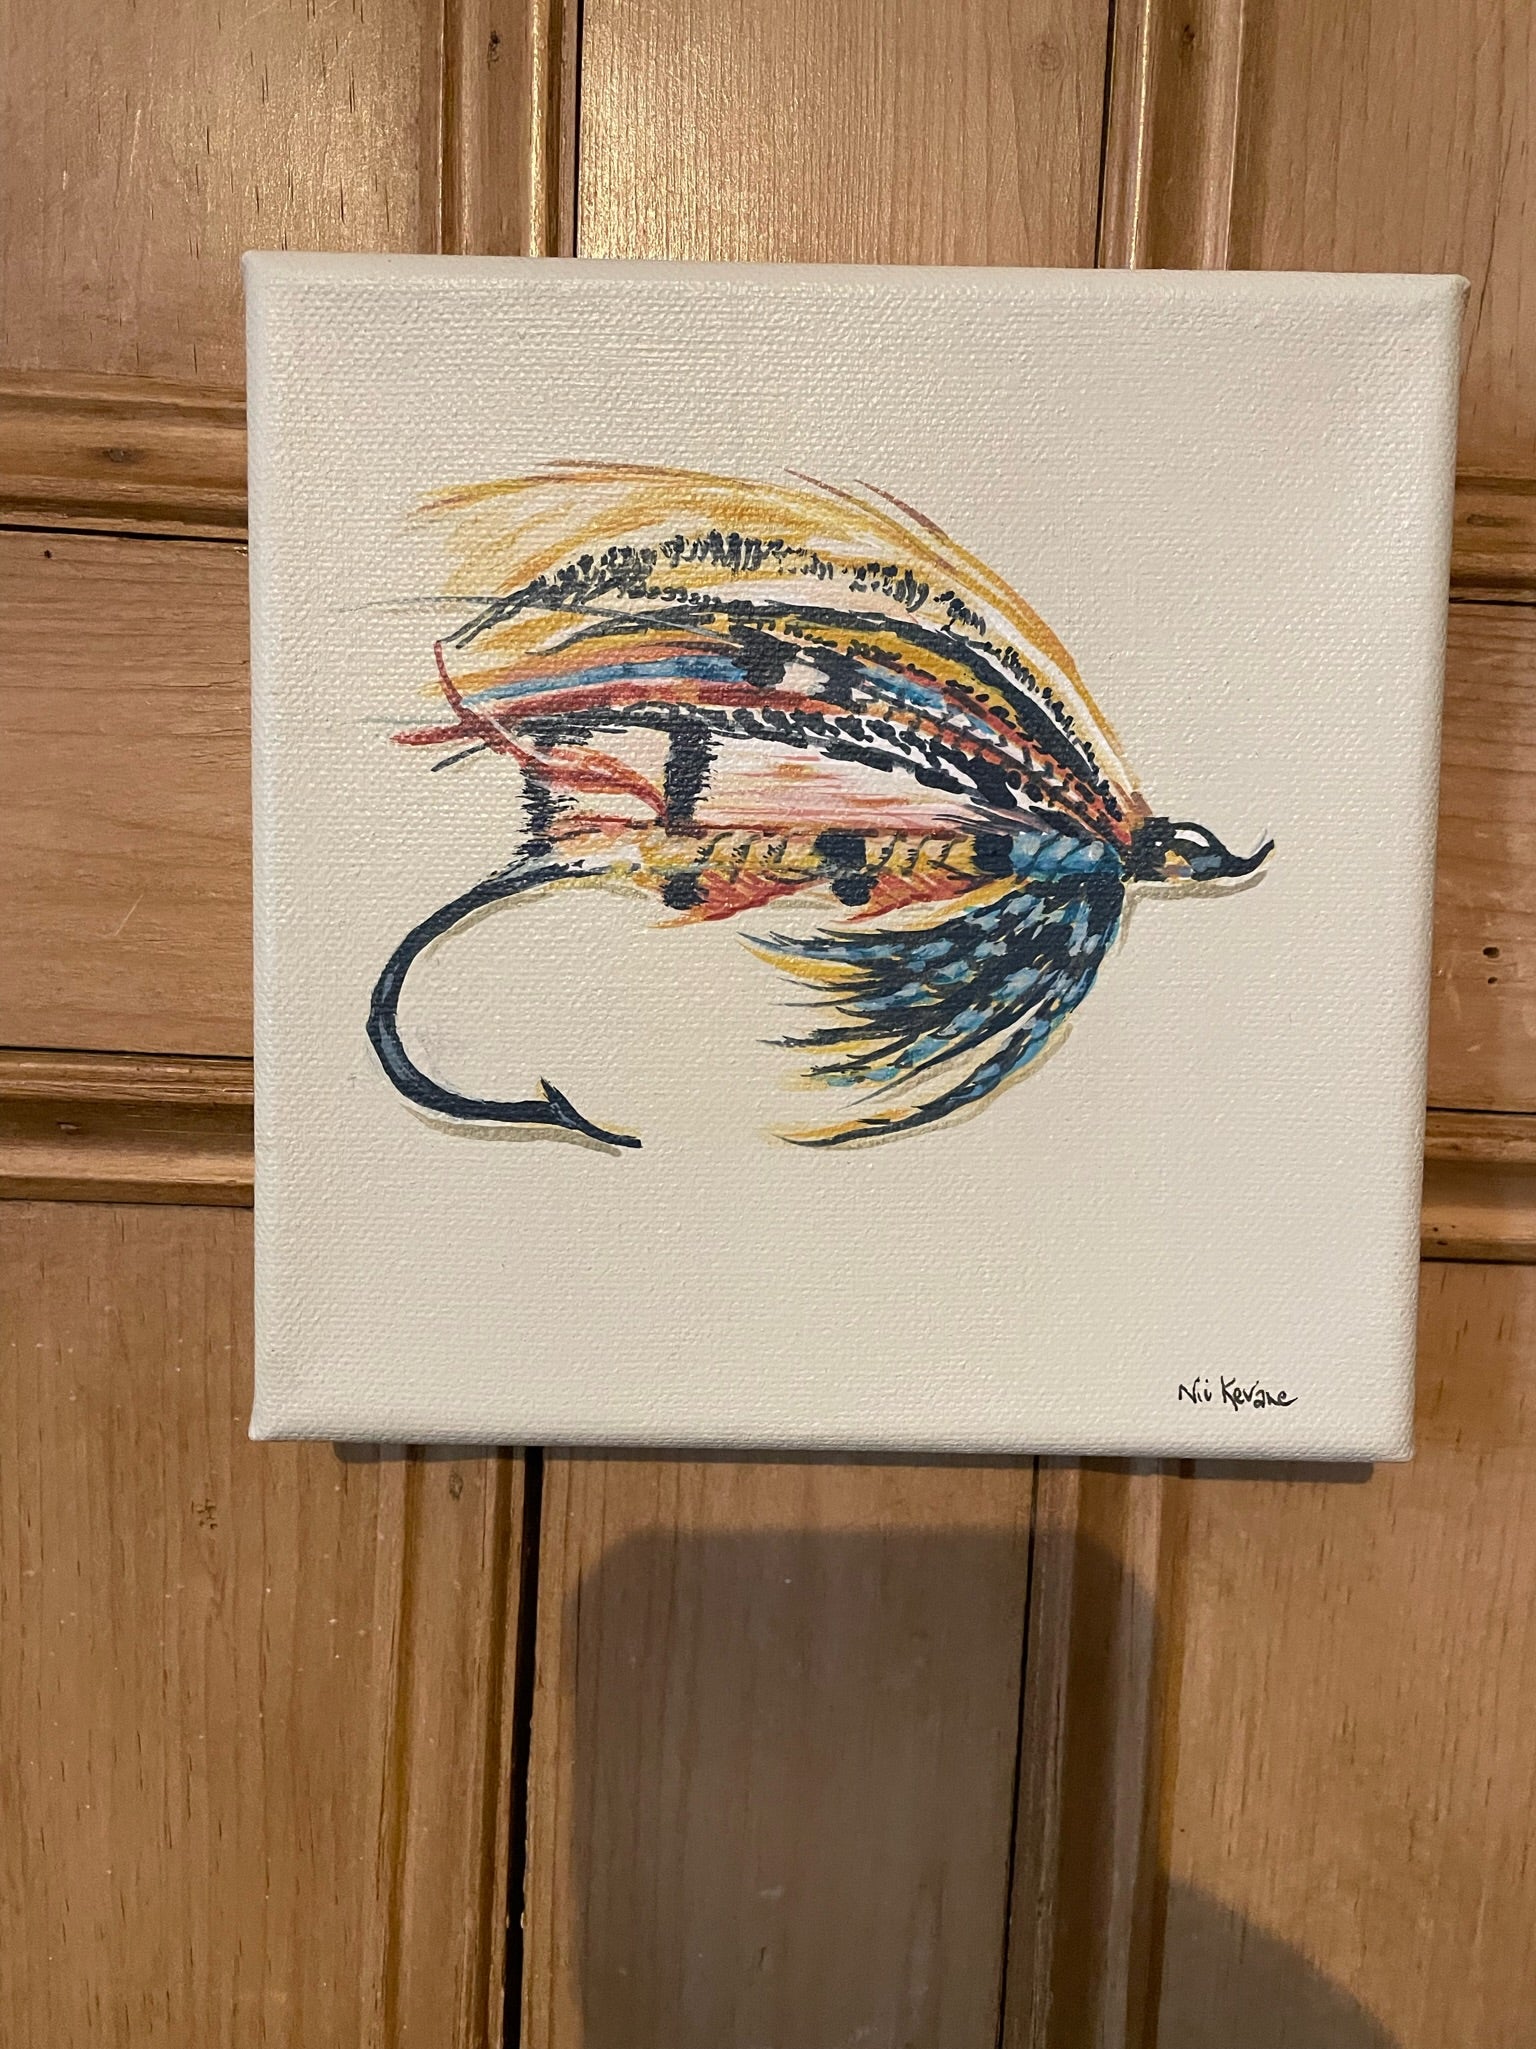 Fishing Fly - 15cm x 15cm mini paintings depicting various countryside subjects.